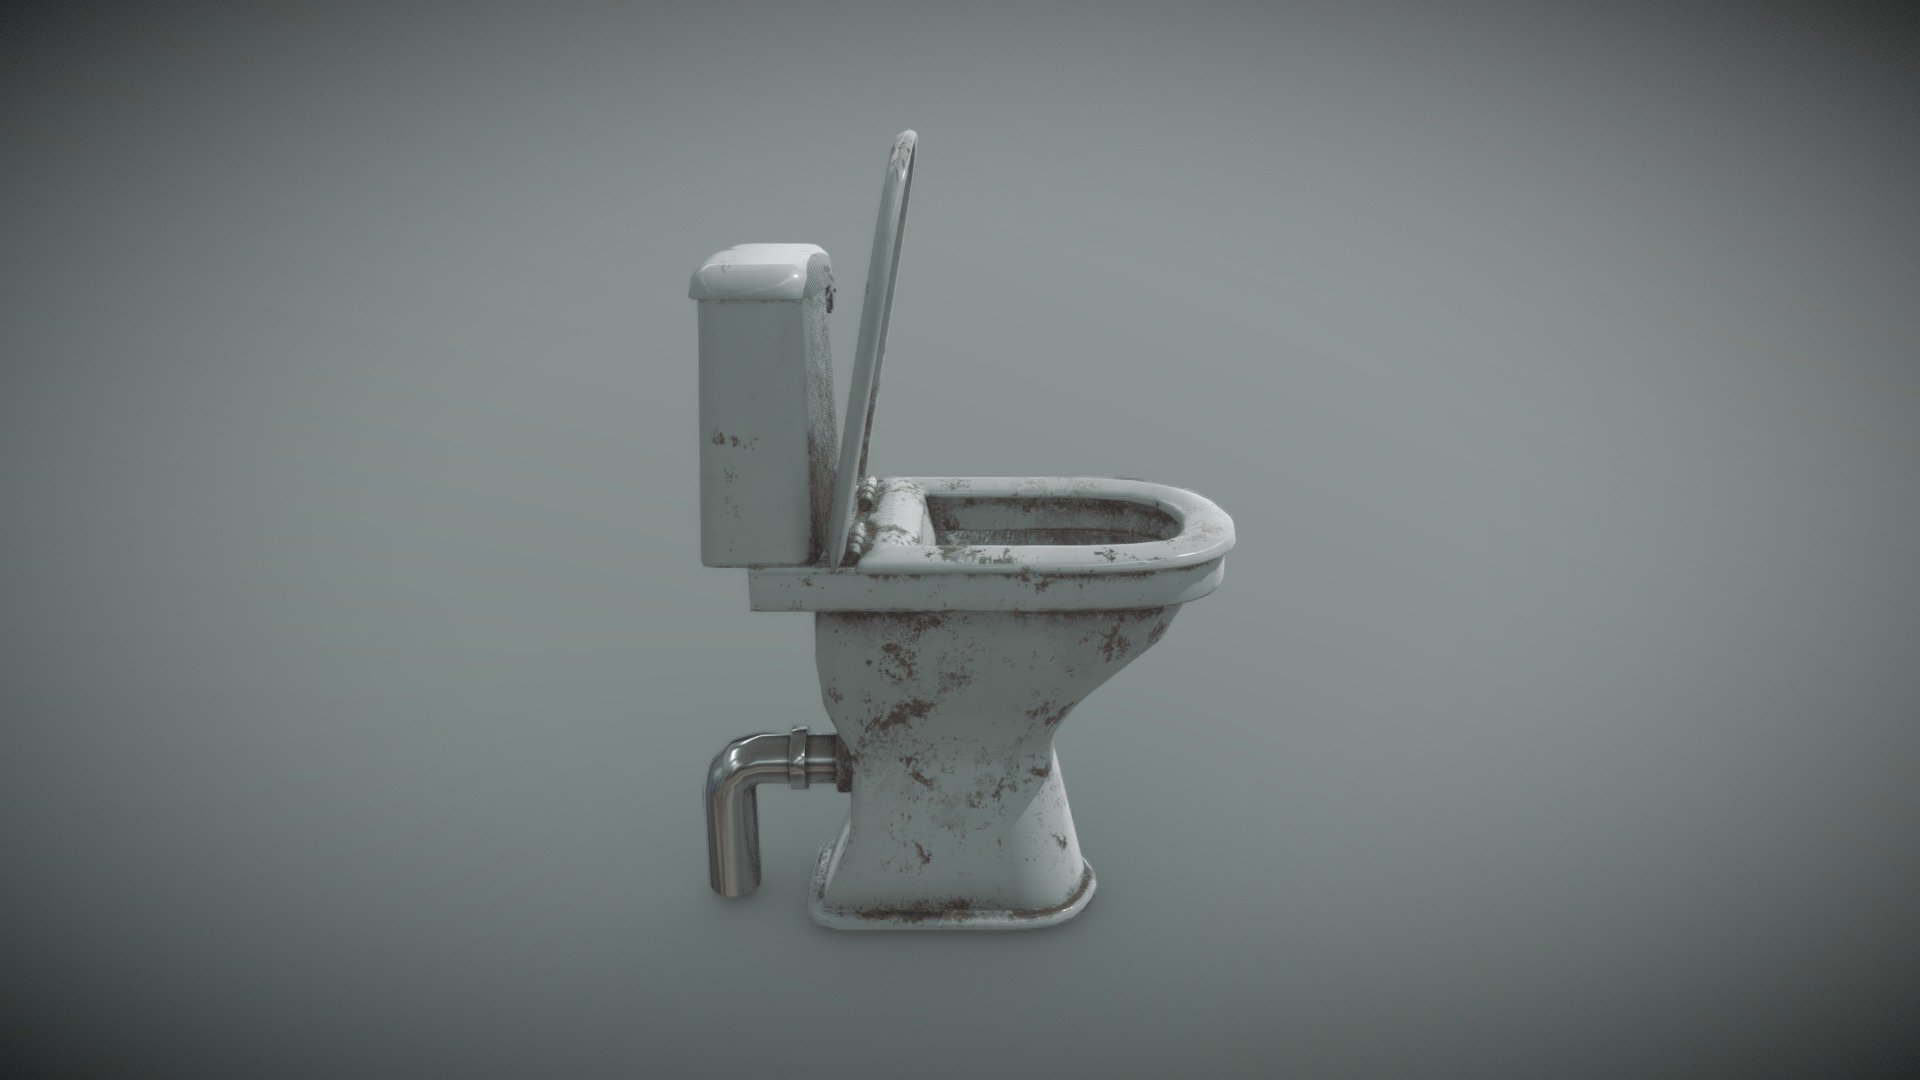 Old Toilet model.

This model is part of the pack that can be found on the AssetStore: https://bit.ly/2zBN8ZM - Old Toilet - 3D model by Rukas (@rukas-skirkevicius) 3d model